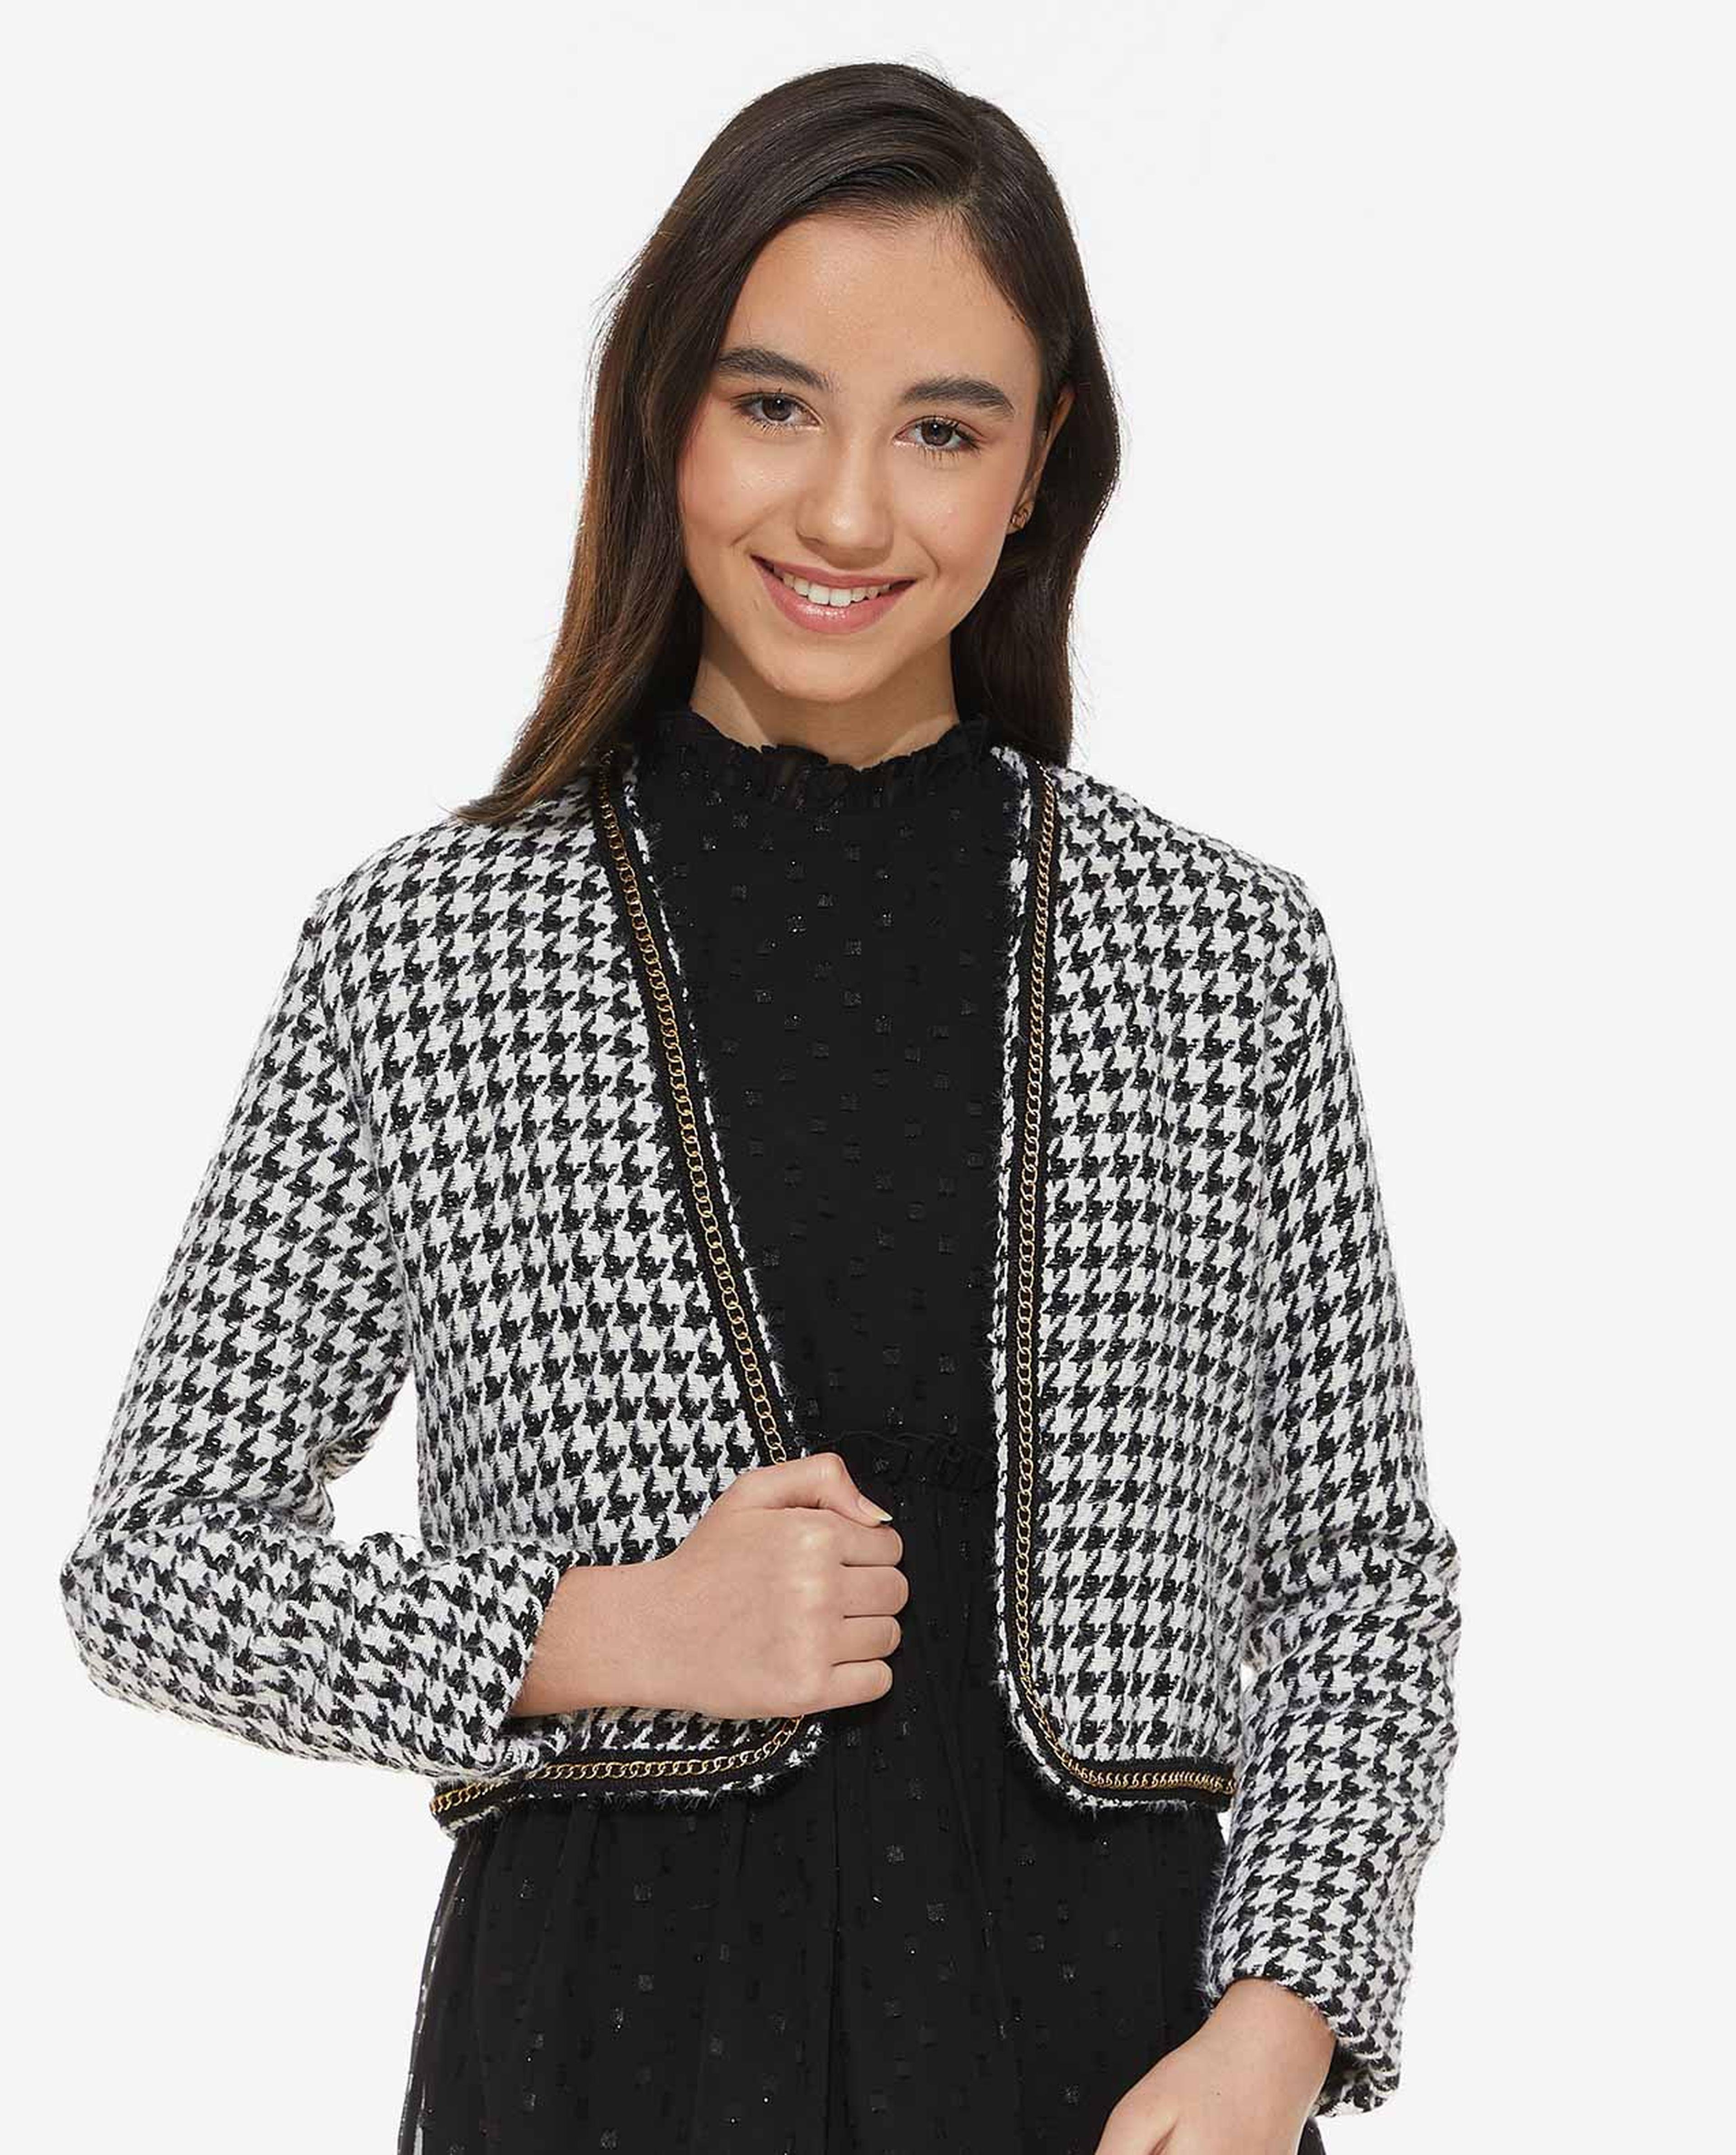 Crowbar Patterned Overcoat with Long Sleeves